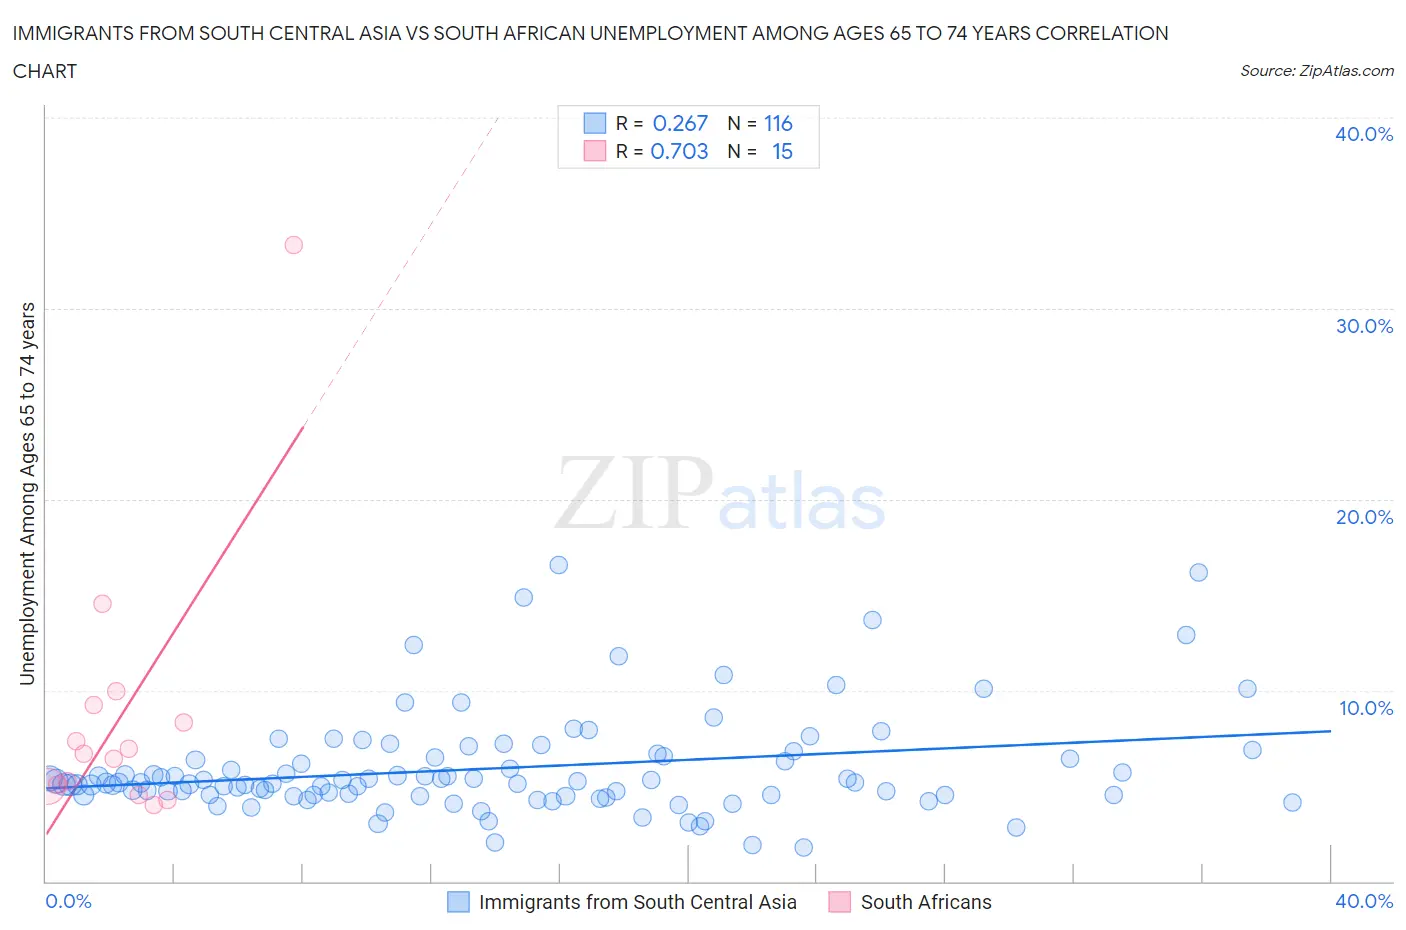 Immigrants from South Central Asia vs South African Unemployment Among Ages 65 to 74 years